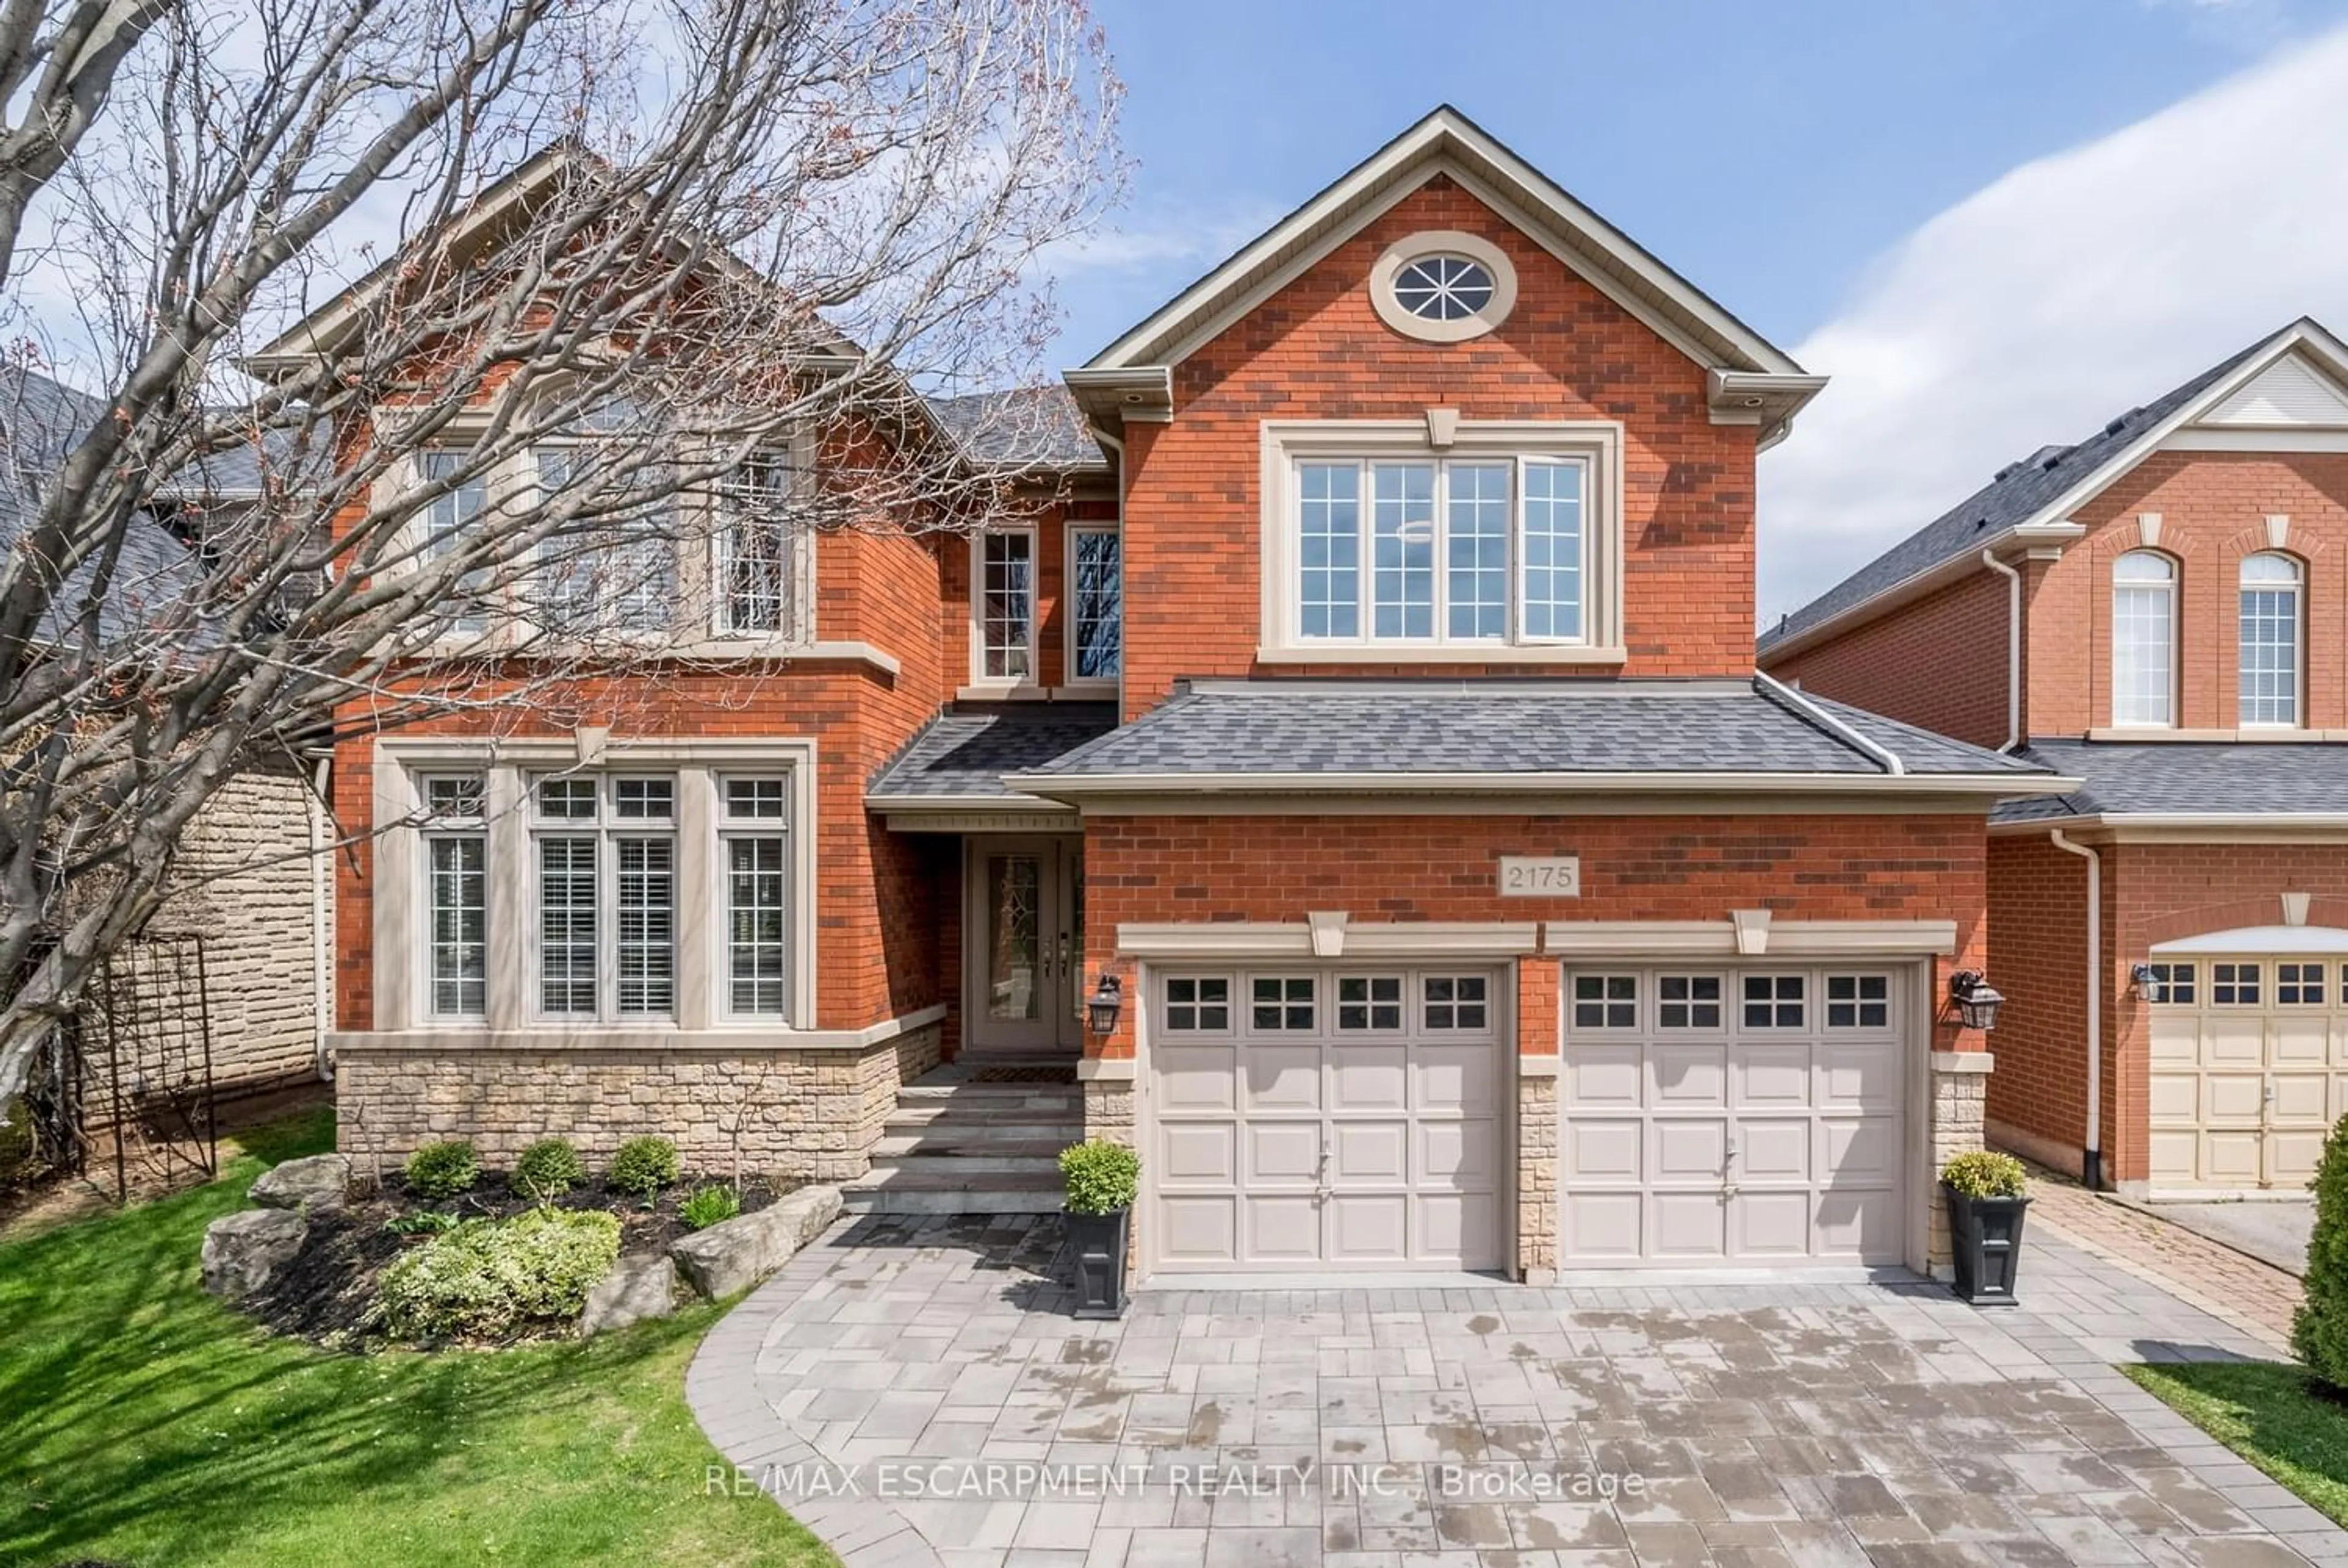 Home with brick exterior material for 2175 North Ridge Tr, Oakville Ontario L6H 6W7